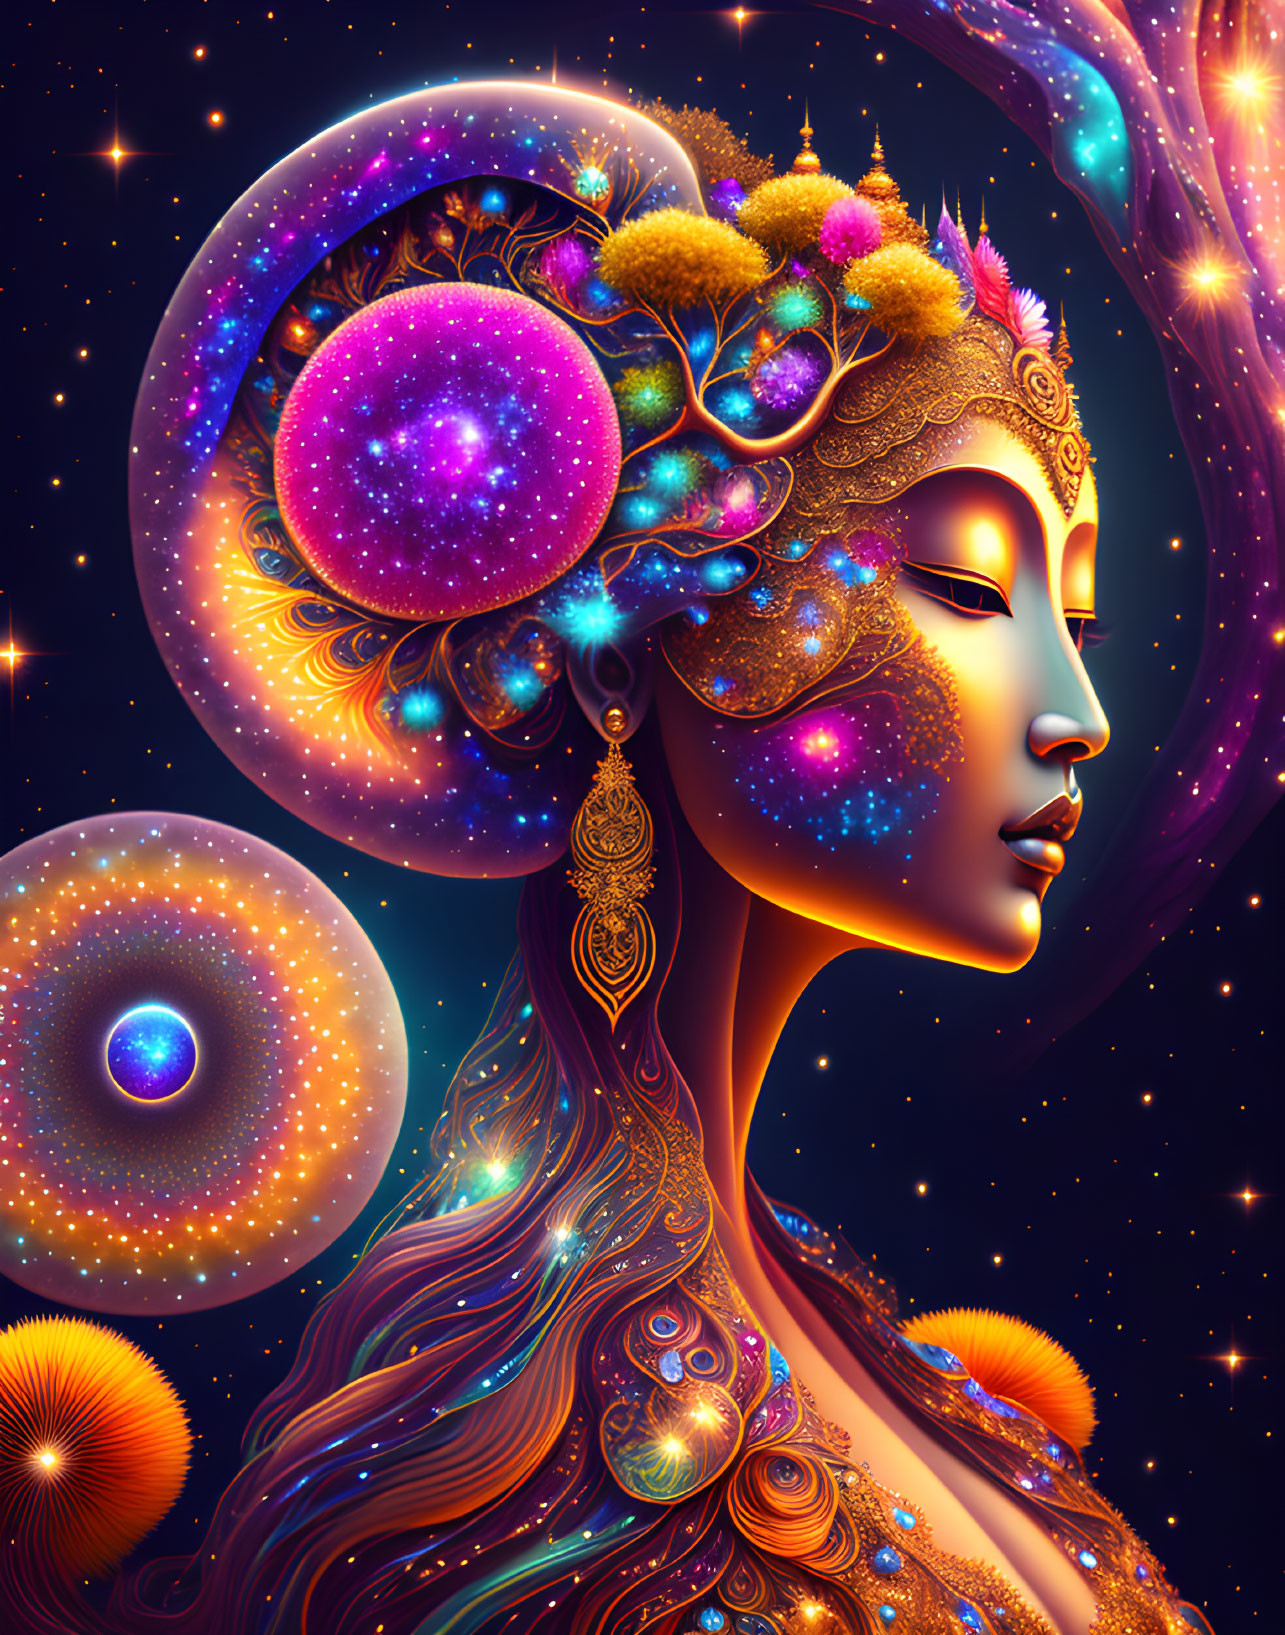 Colorful digital artwork of celestial woman with nature and cosmic elements integrated.